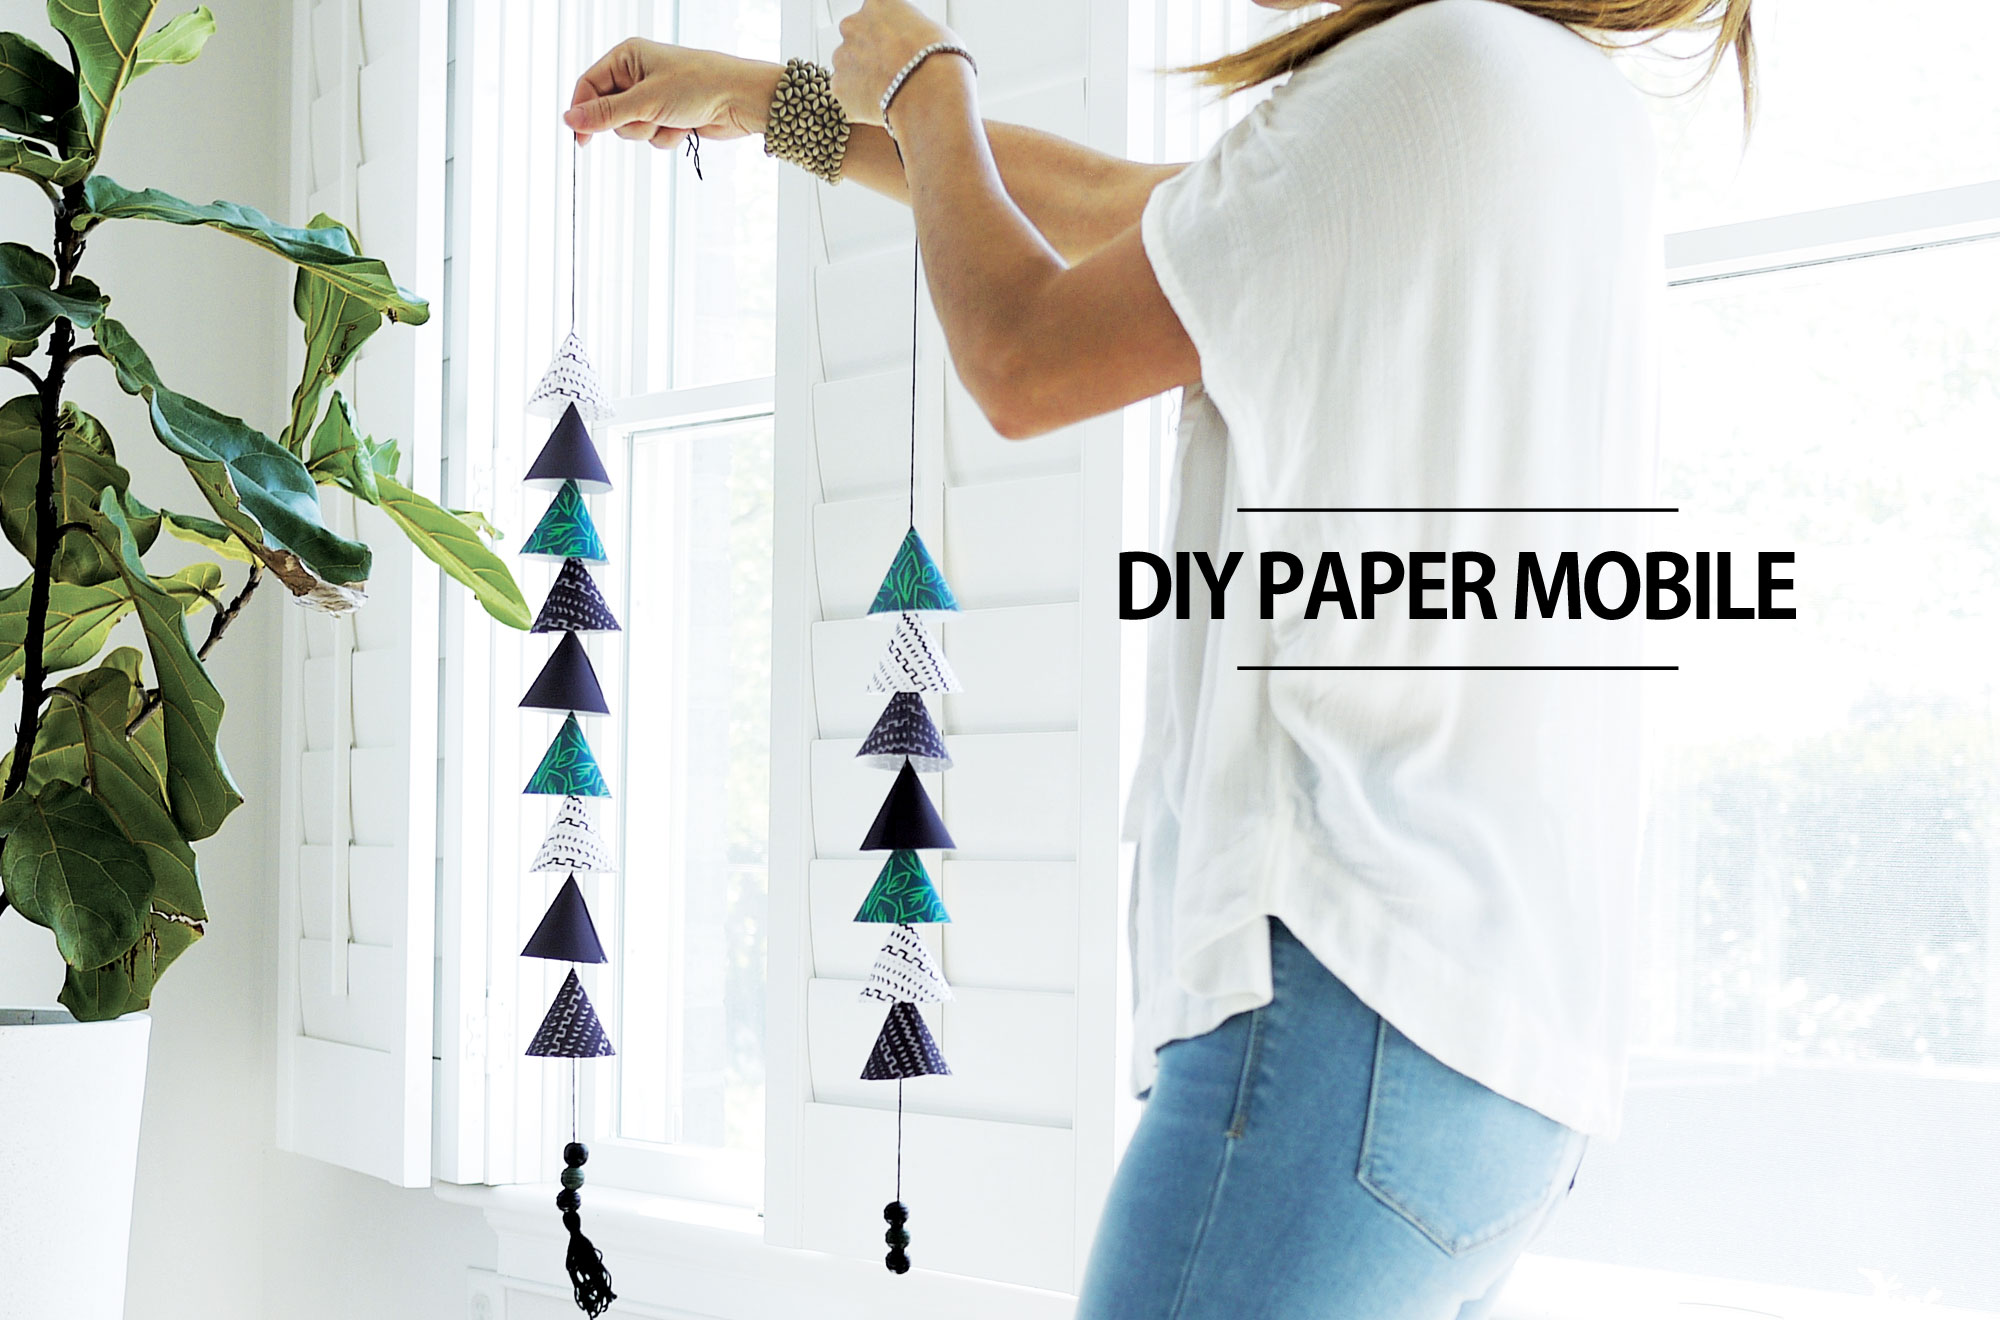 DIY Paper Mobile with Free Printable Template - Project Nursery